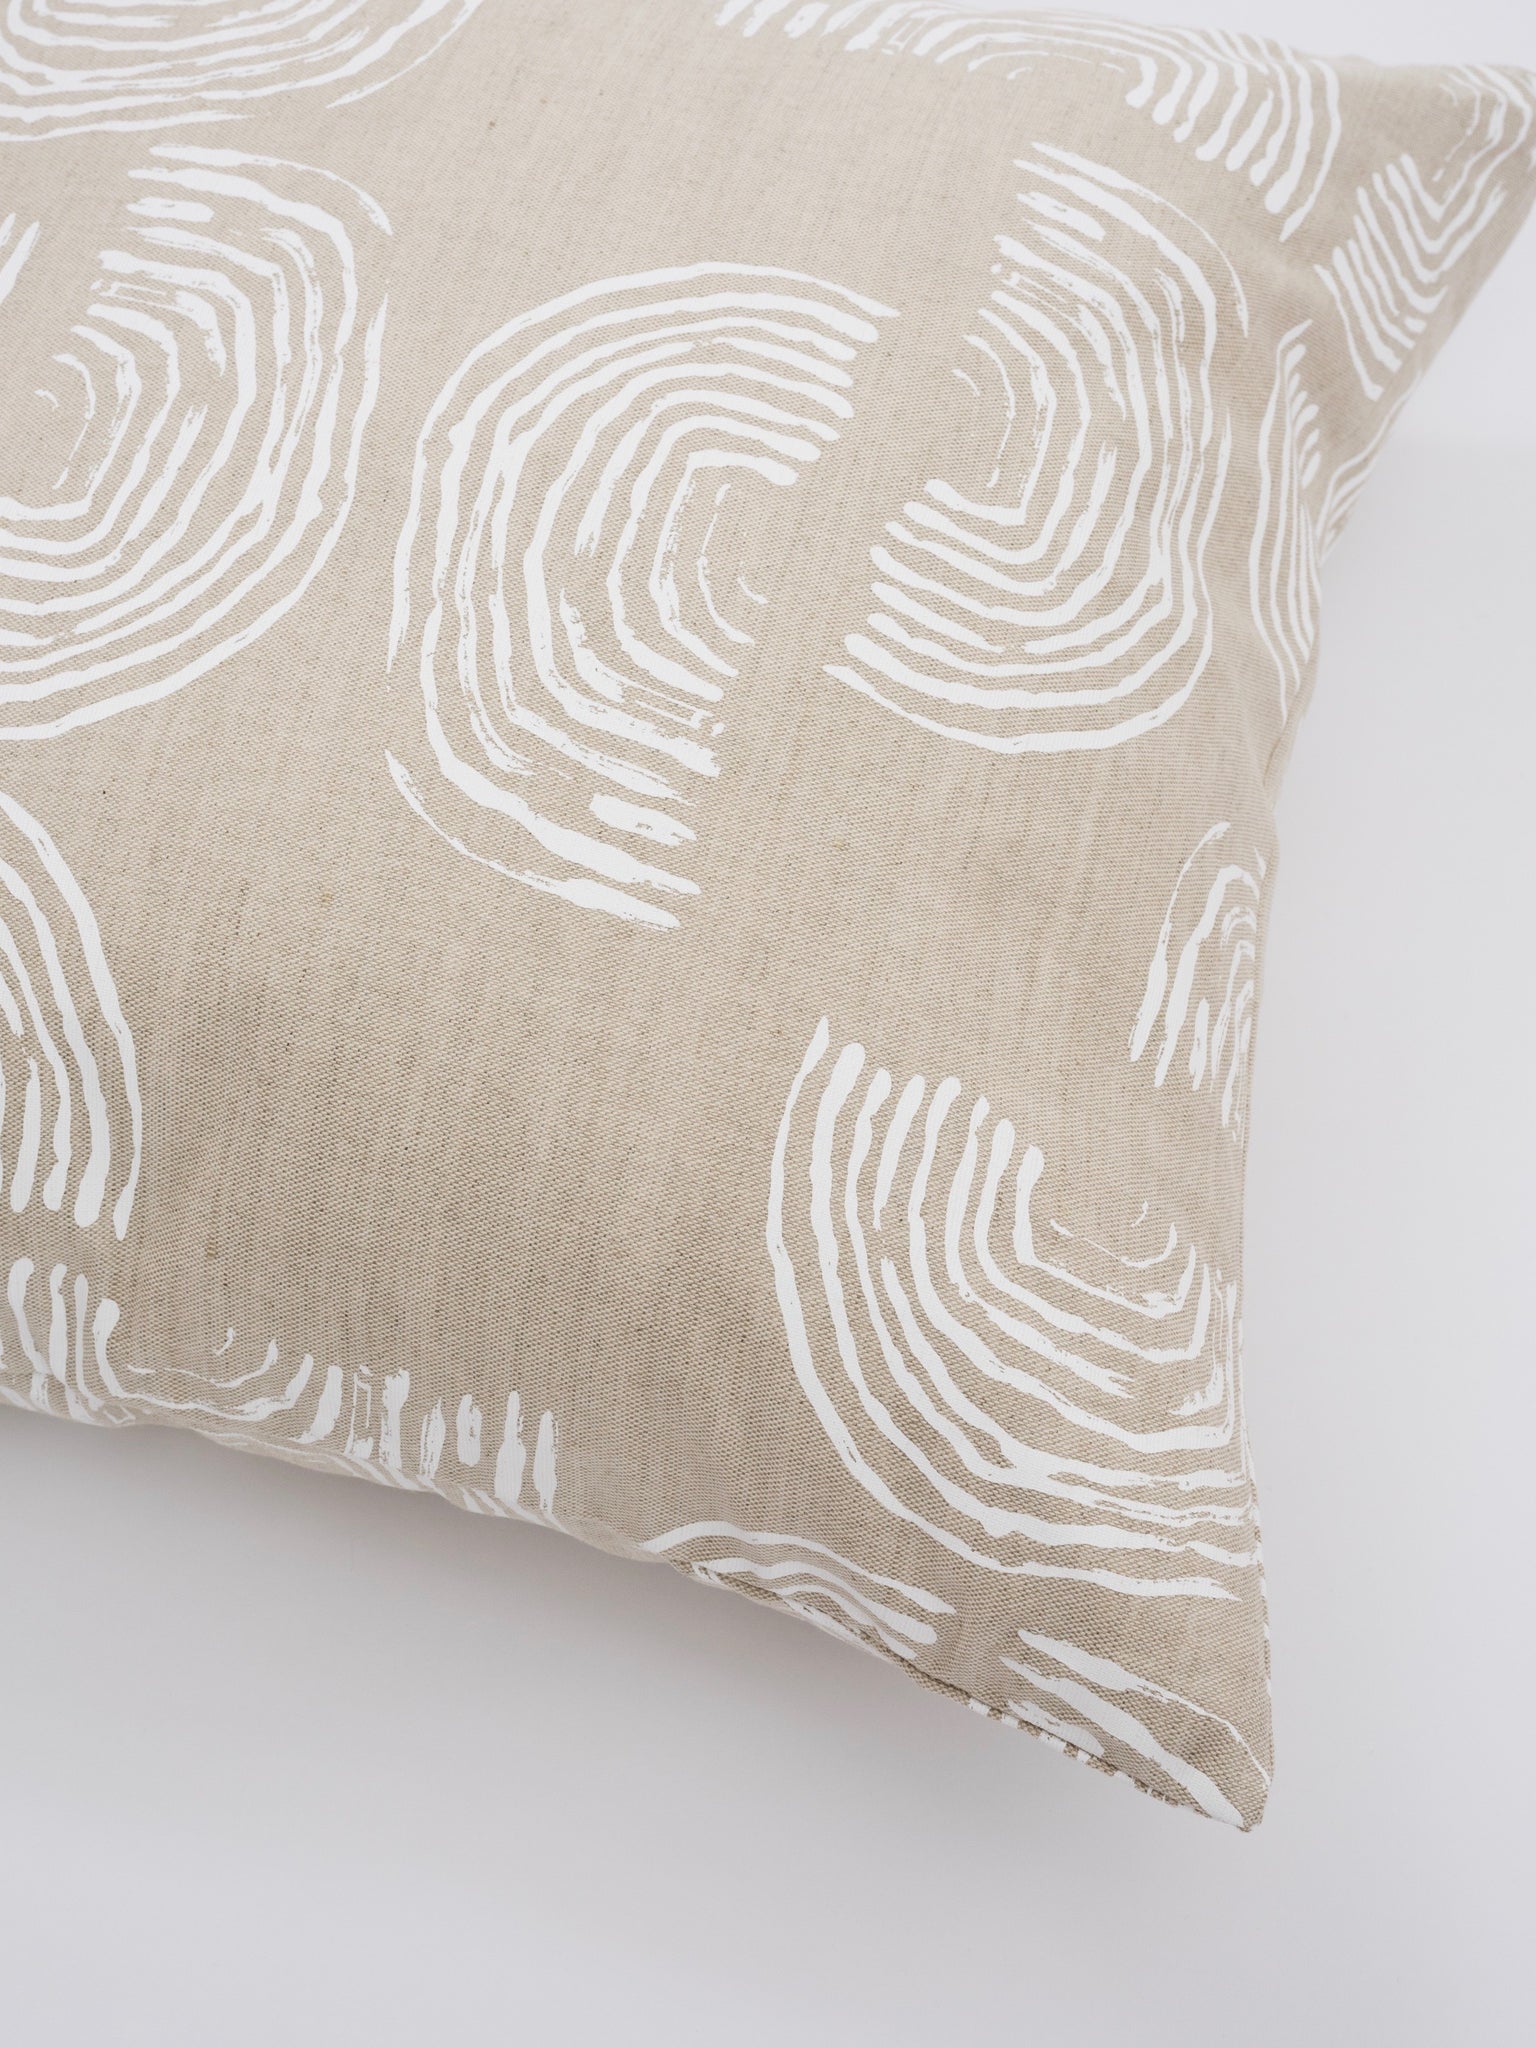 Squiggles Pillow